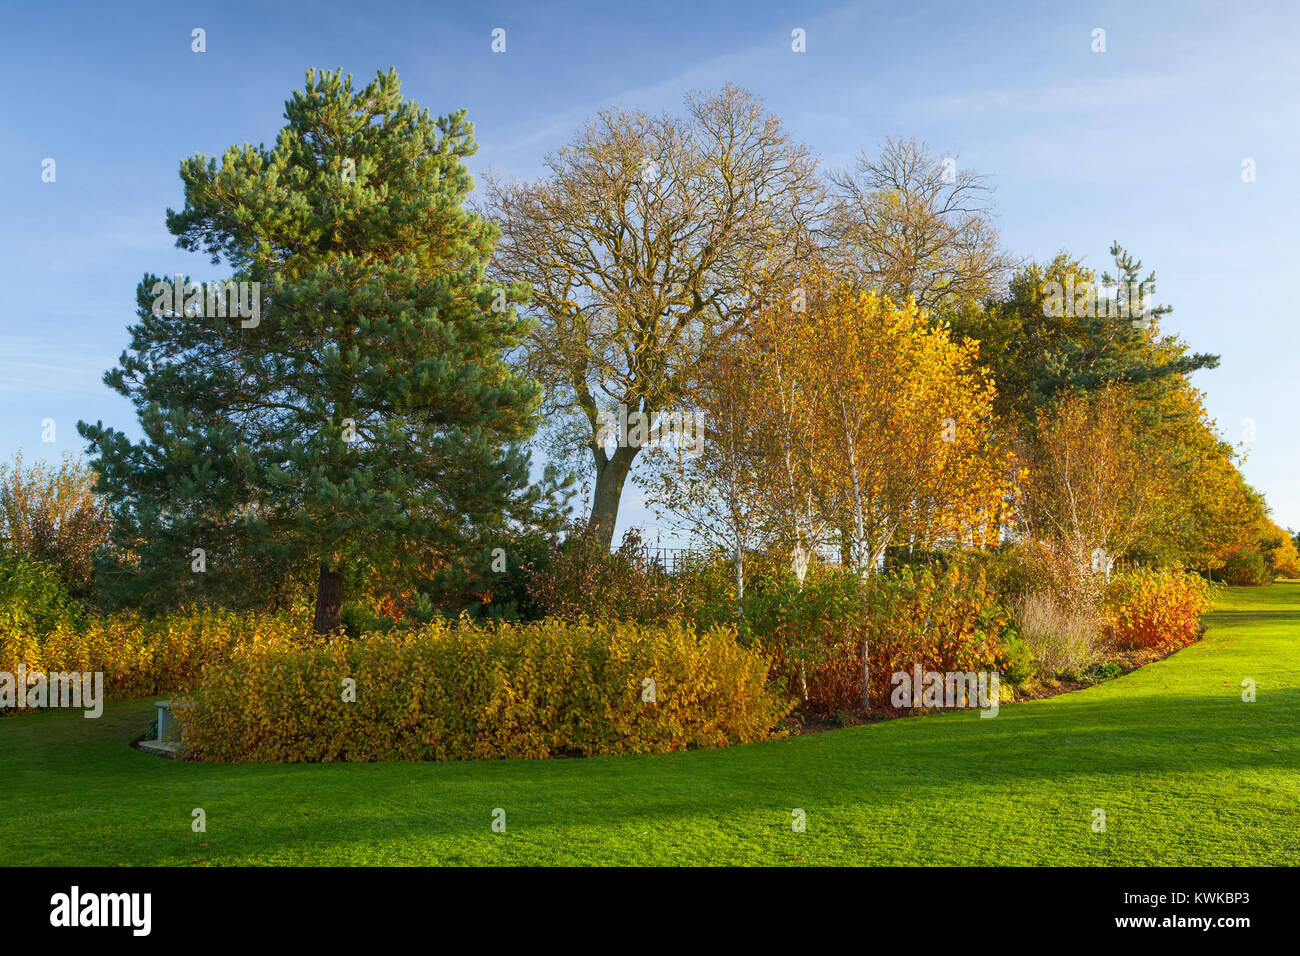 Brightwater Gardens, Saxby, Lincolnshire, UK. Autumn, October 2017. Stock Photo